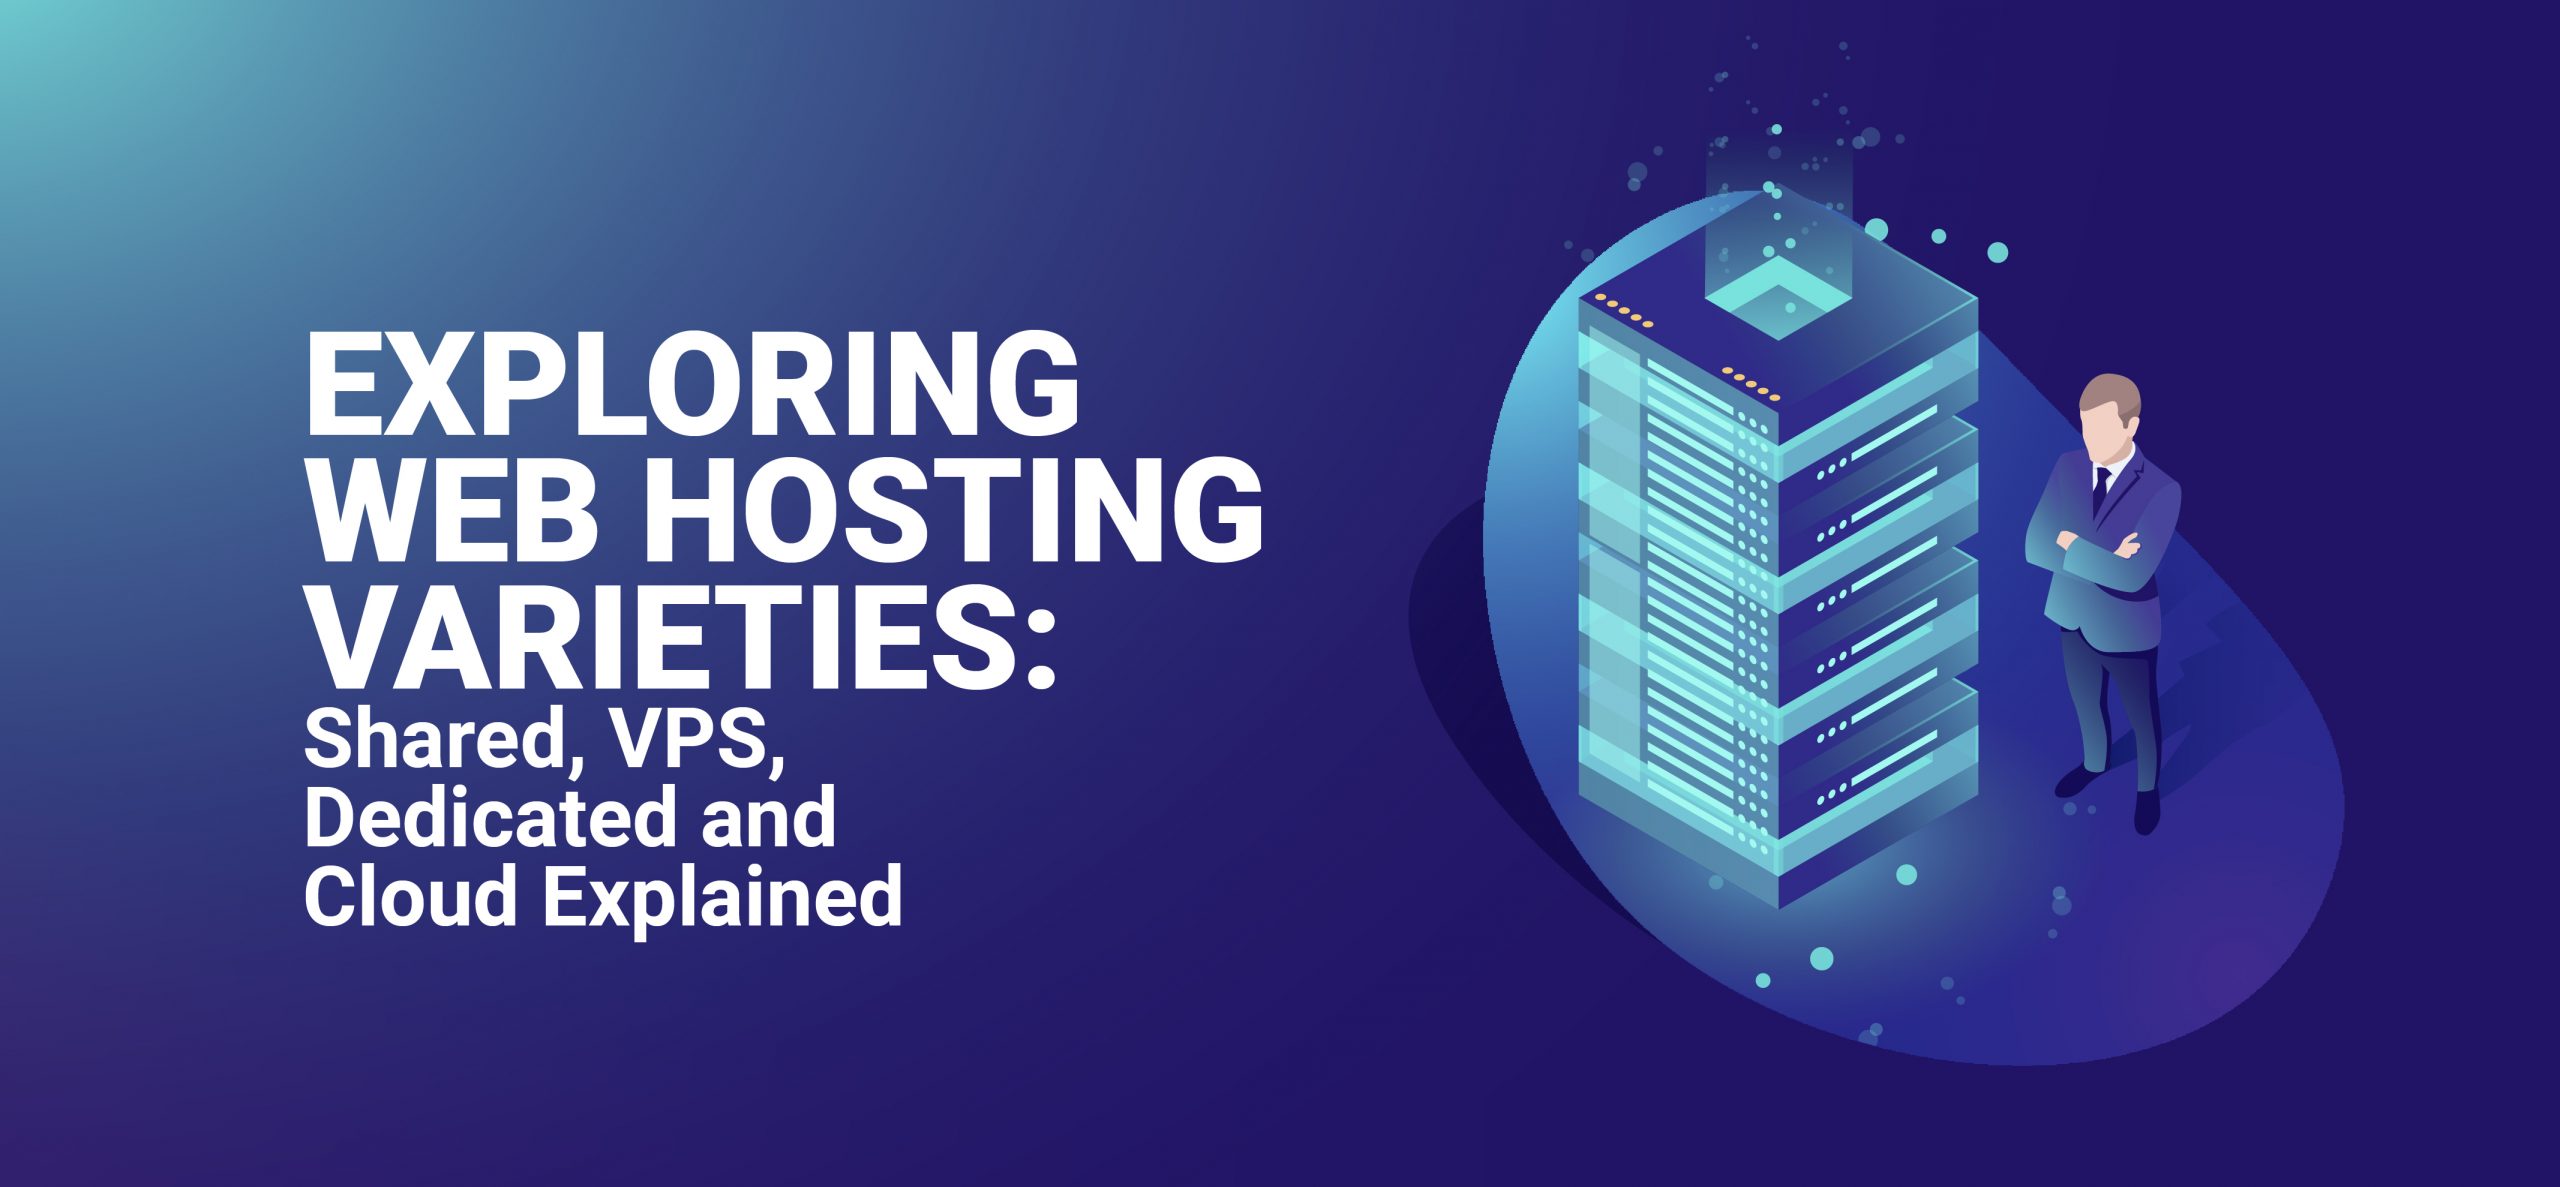 Understanding Different Types of Web Hosting: Shared, VPS, Dedicated, and Cloud